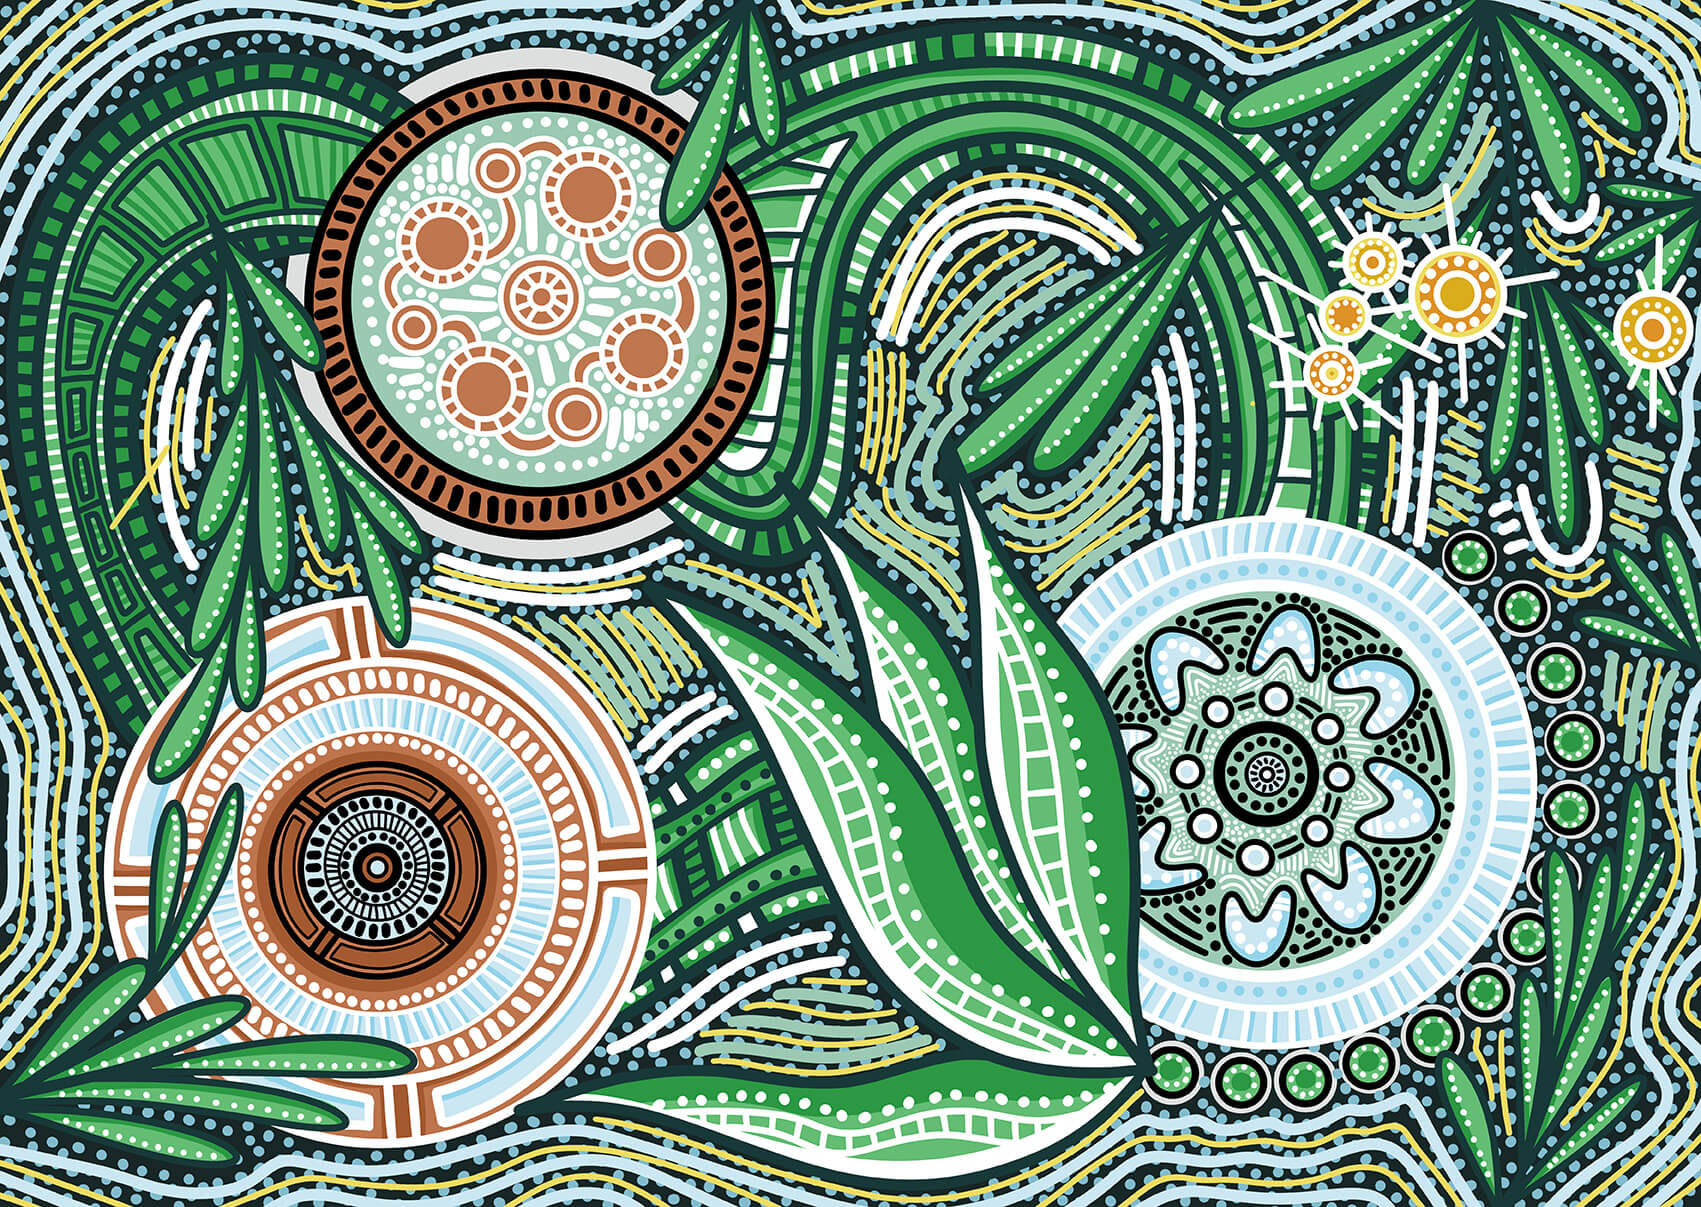 NGS Super Reflect Reconciliation Action Plan - Bree Buttenshaw